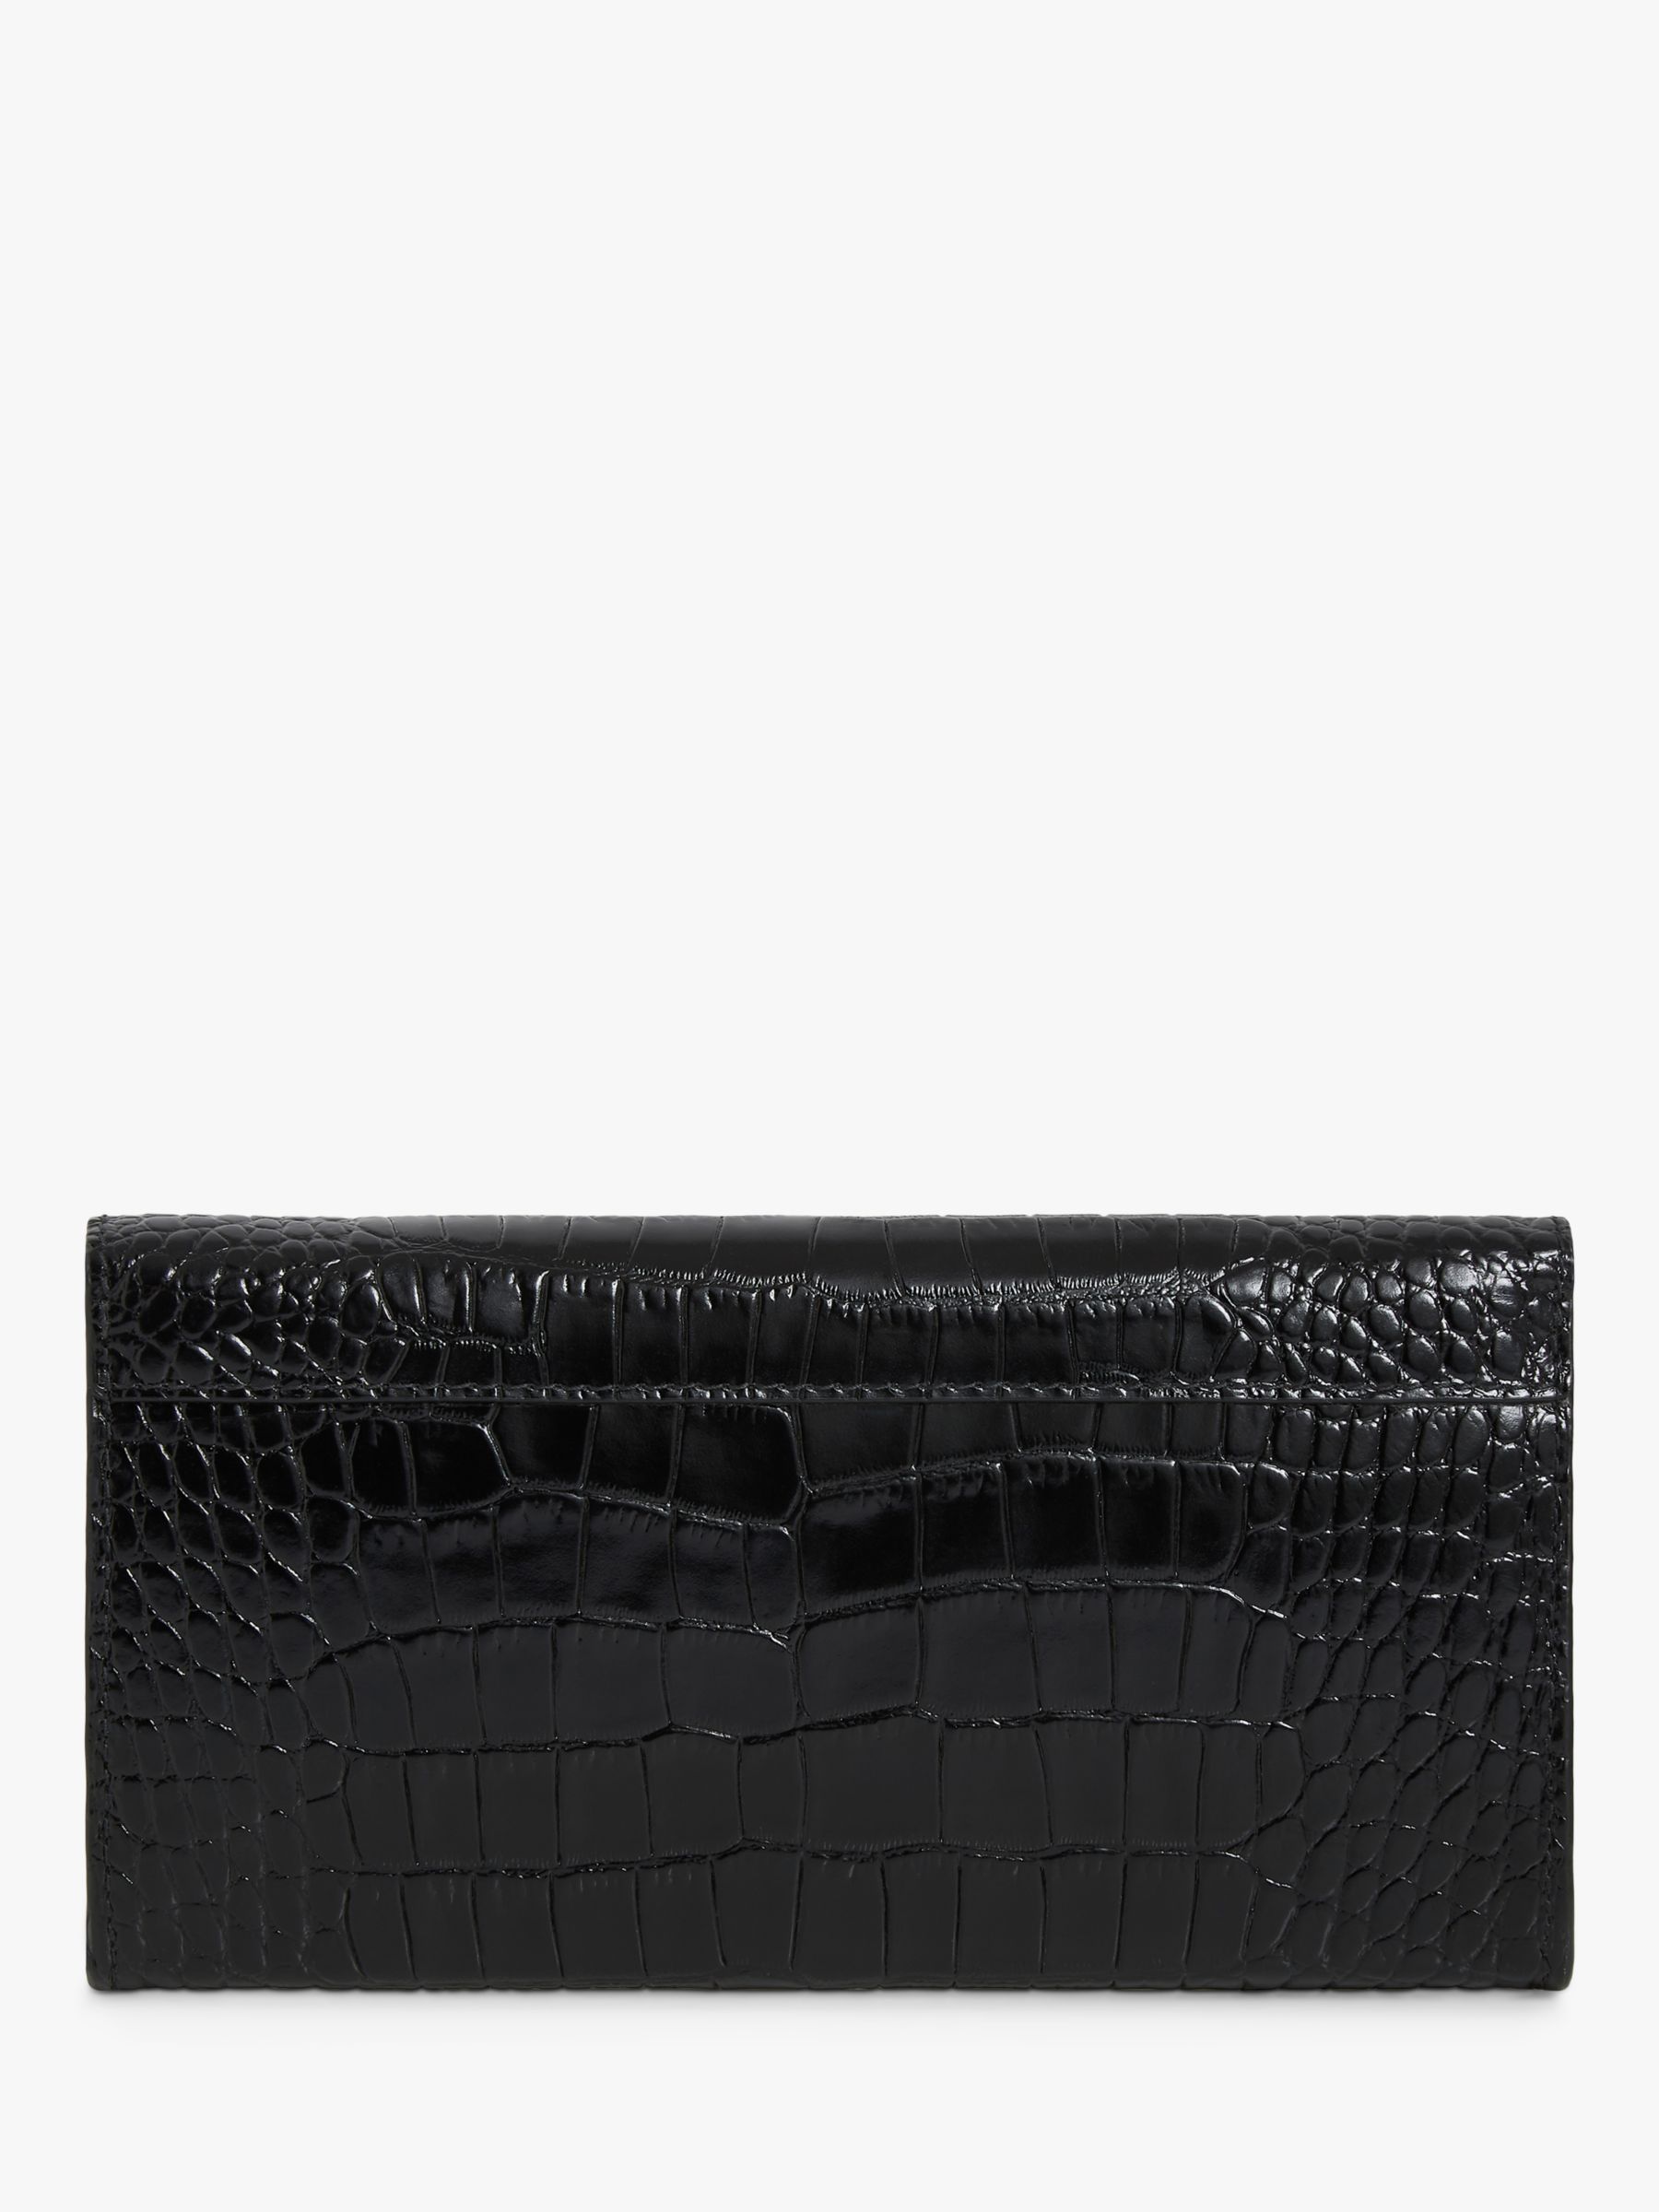 Strathberry Multrees Leather Wallet On Chain, Black Croc at John Lewis ...